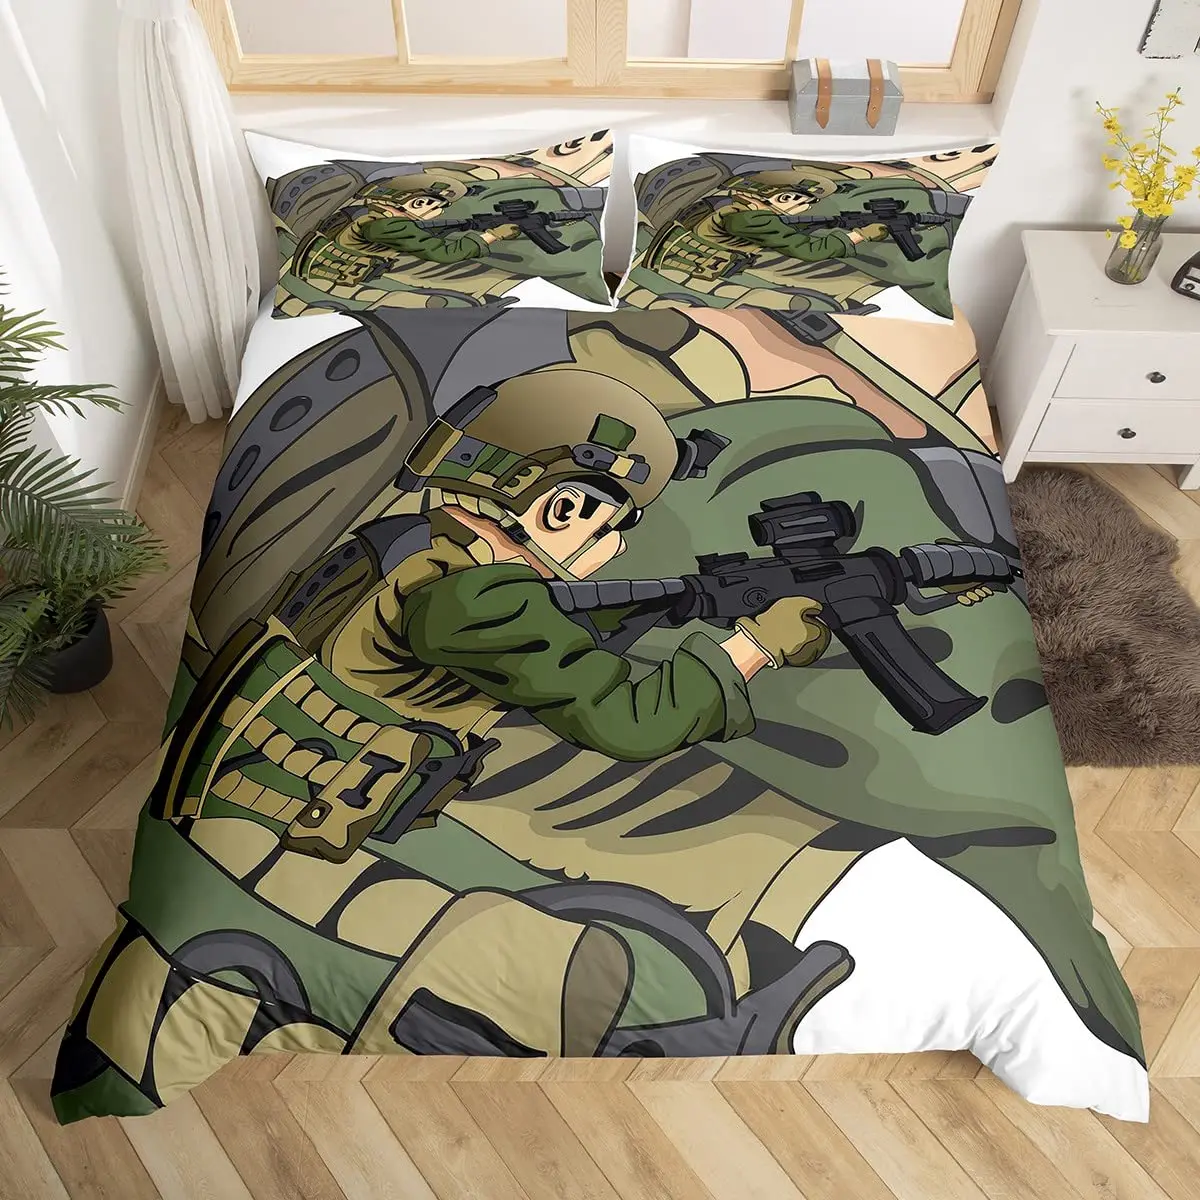 

Soldier Duvet Cover Set King Size Soldier Helicopter Silhouette Bedding Set Microfiber 2/3pcs Green Black Military Quilt